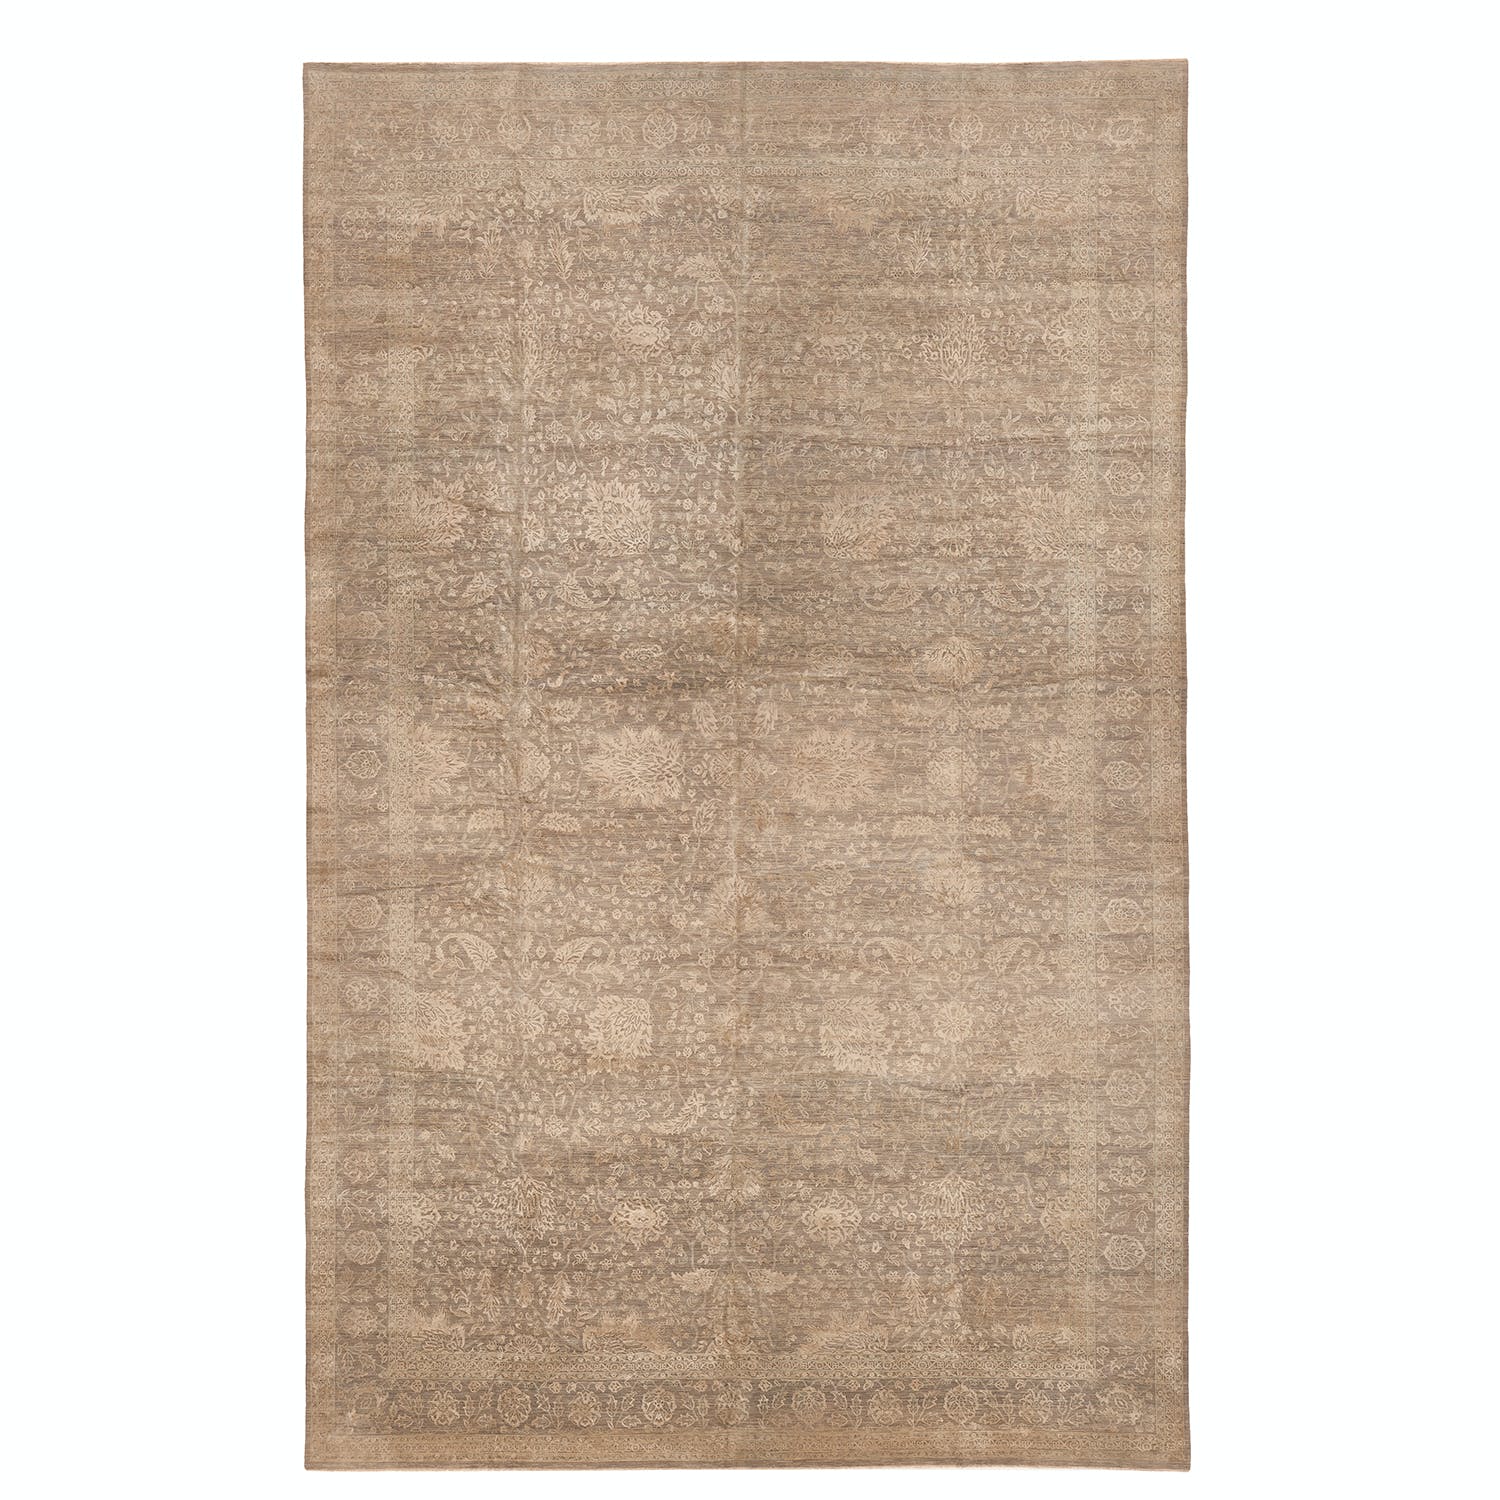 Vintage rectangular rug with distressed appearance and intricate traditional pattern.